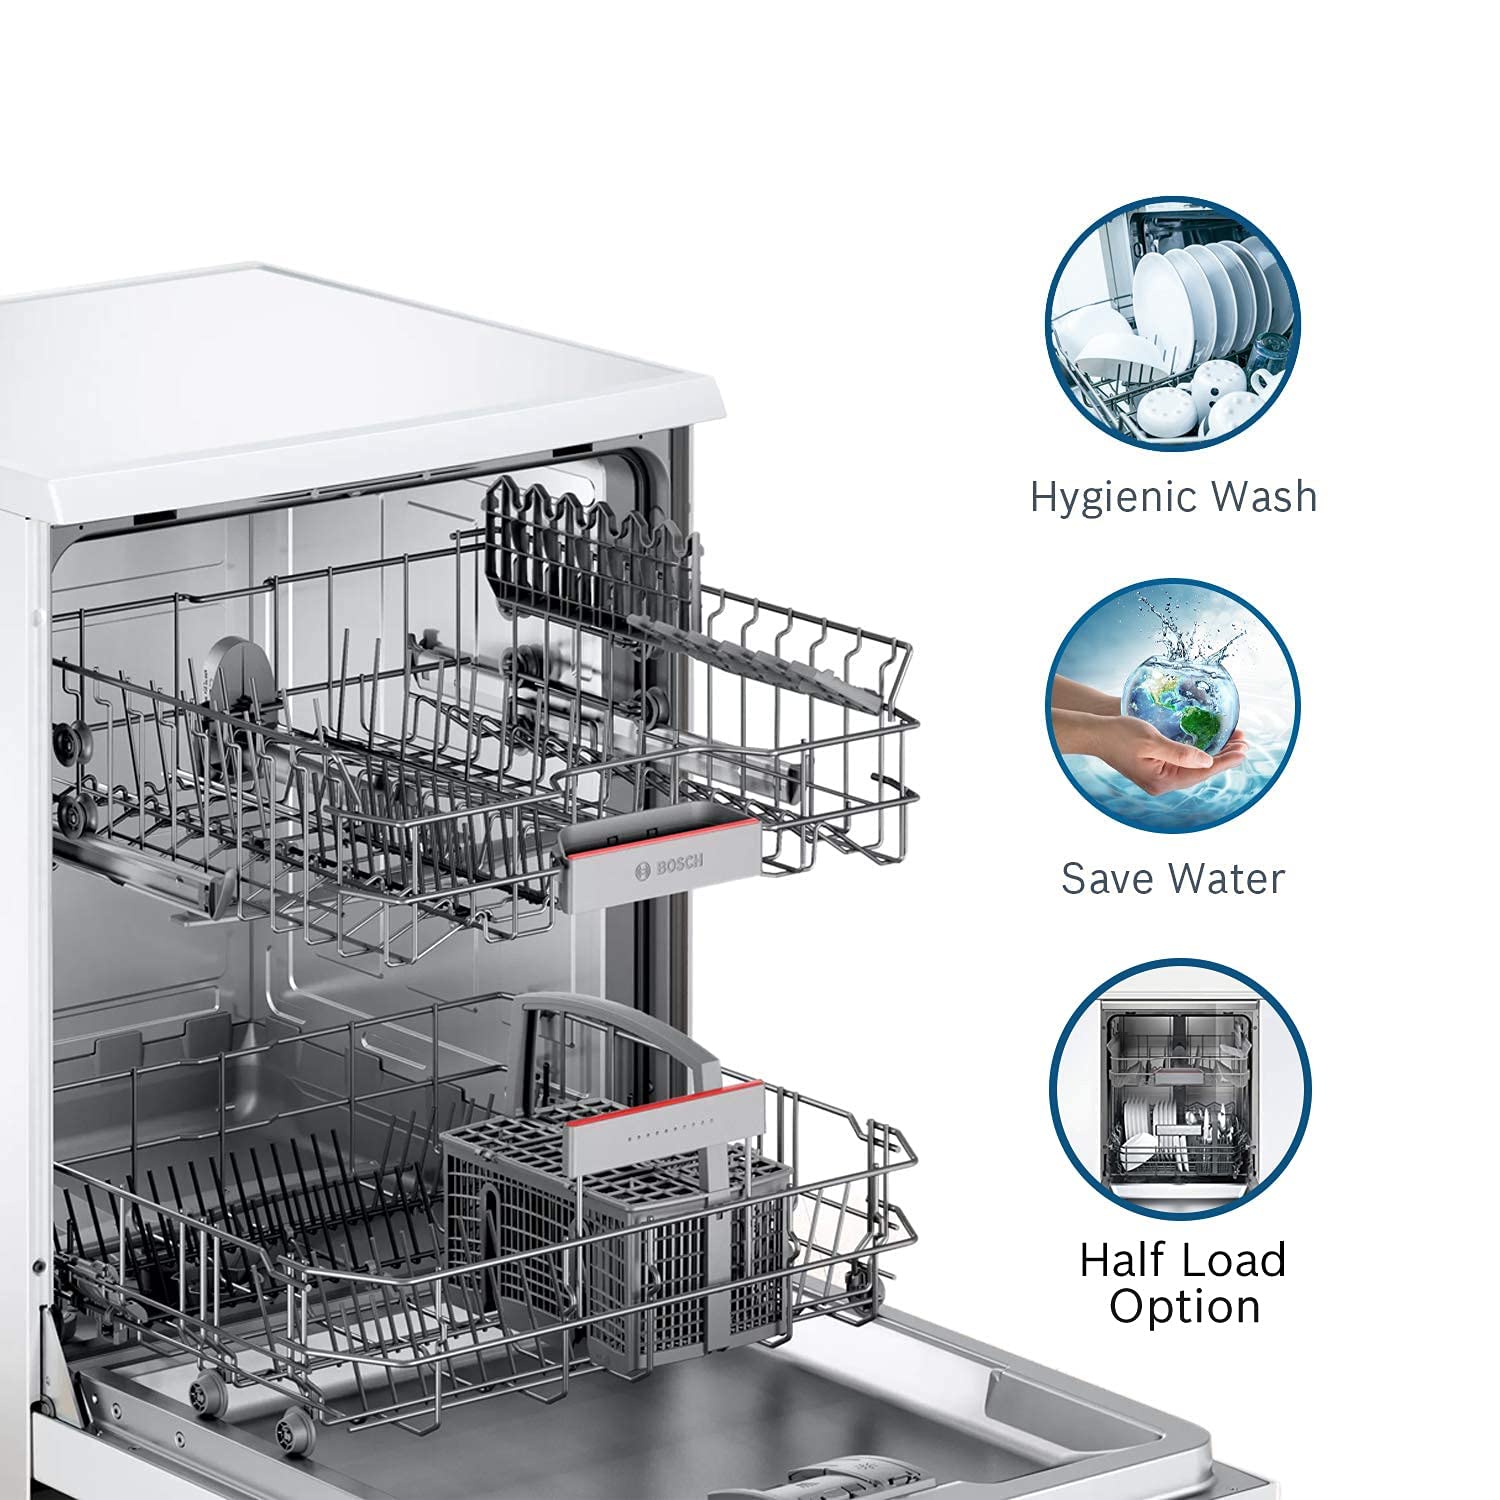 Bosch SMS66GW01I Free Standing 12 Place Settings Dishwasher (White)